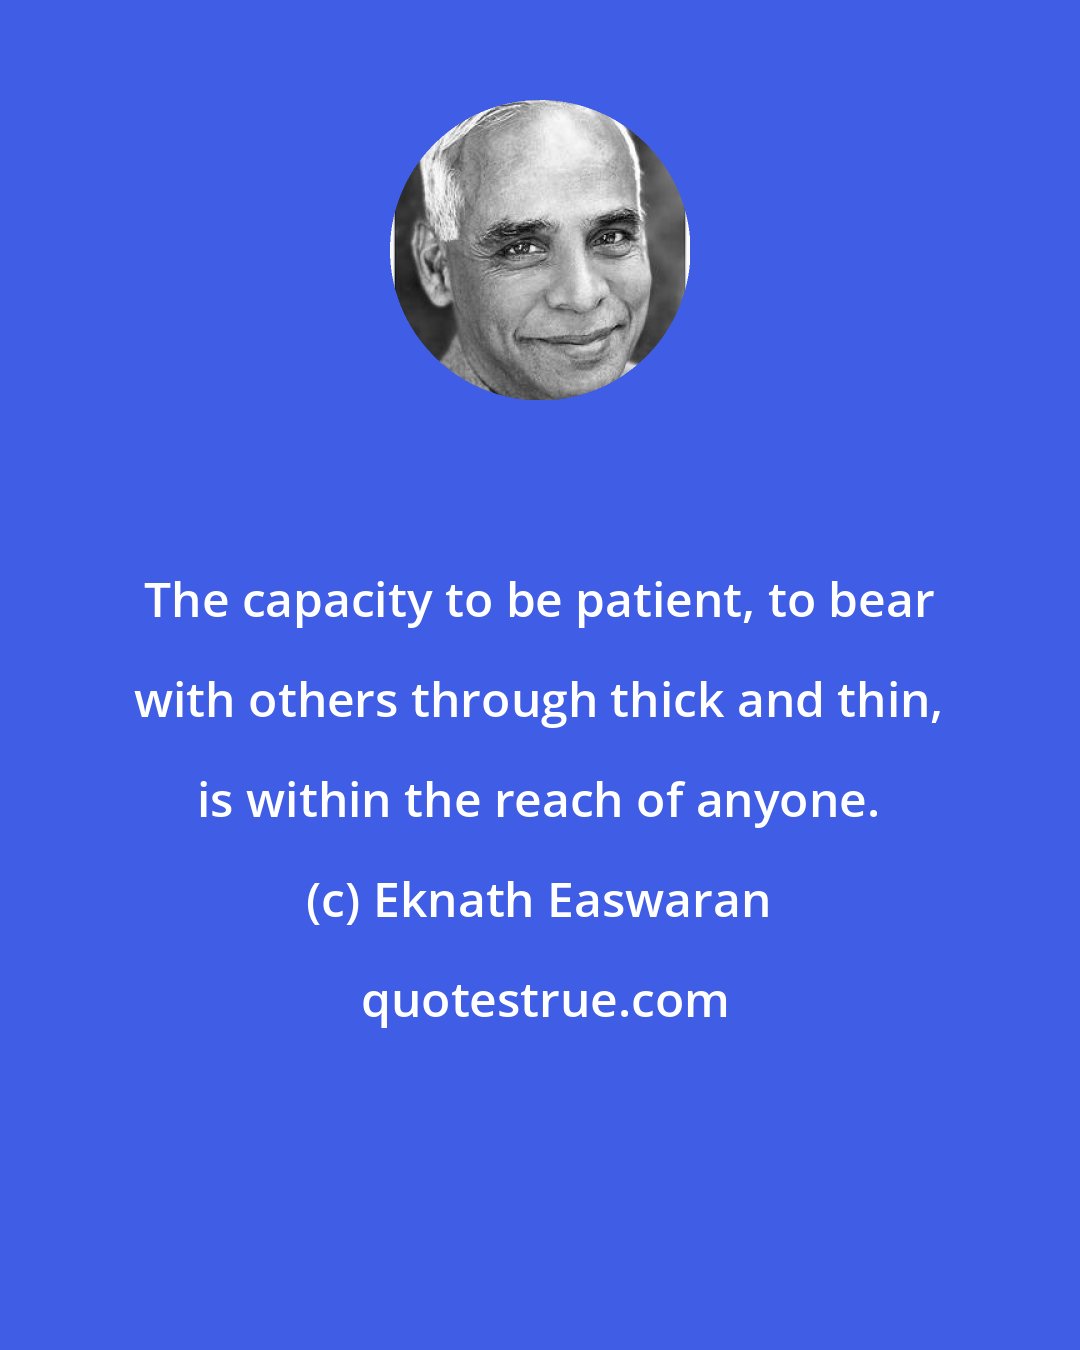 Eknath Easwaran: The capacity to be patient, to bear with others through thick and thin, is within the reach of anyone.